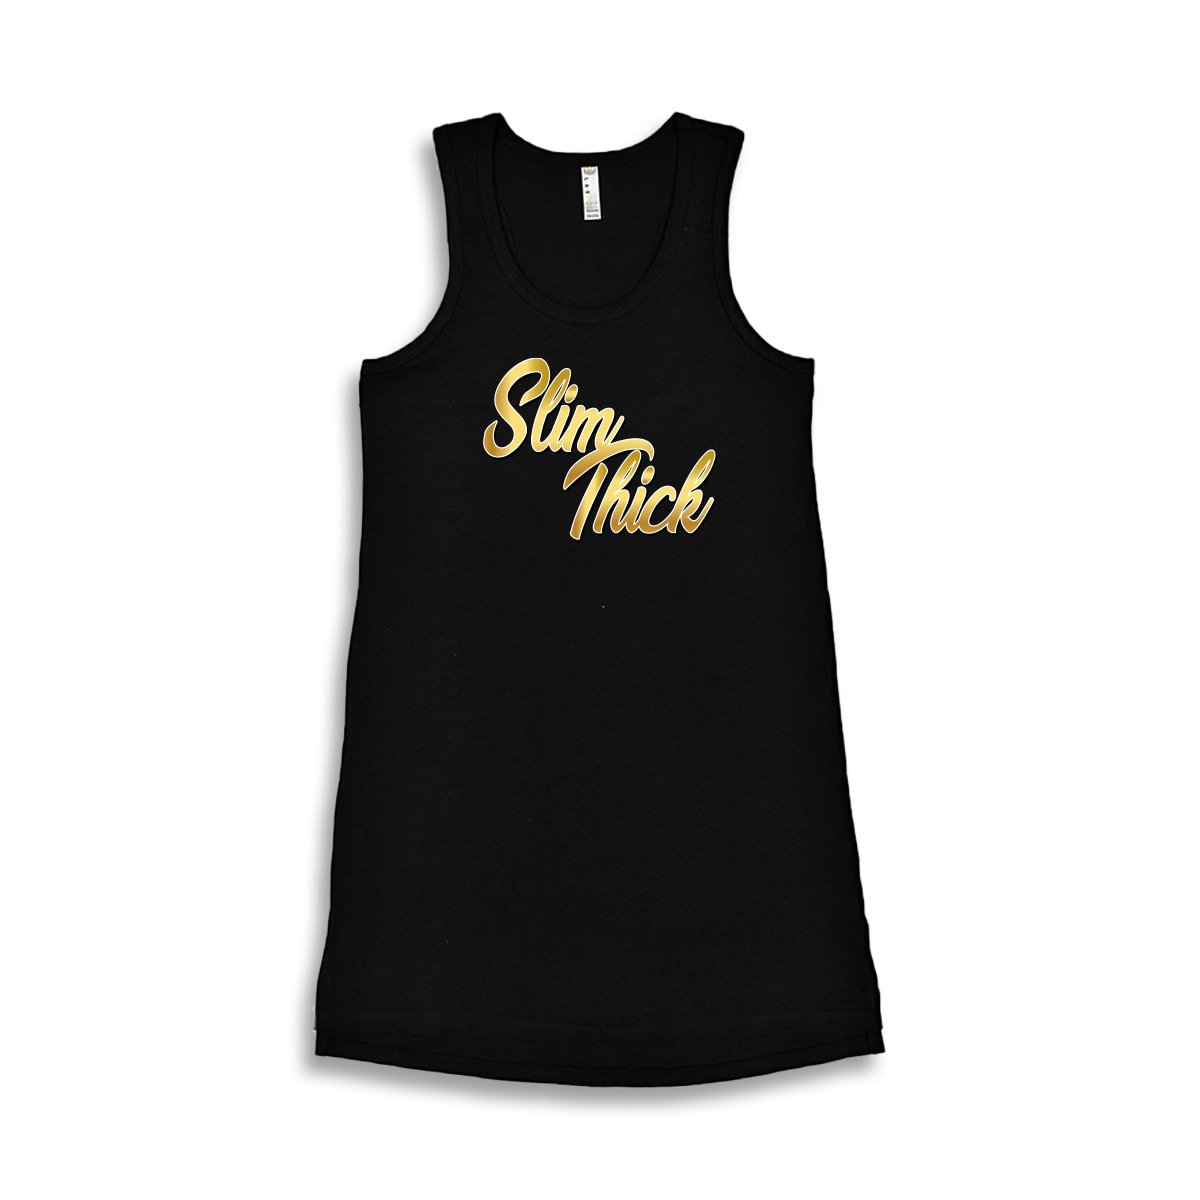 'Slim Thick' in Gold Women's Tank Dress